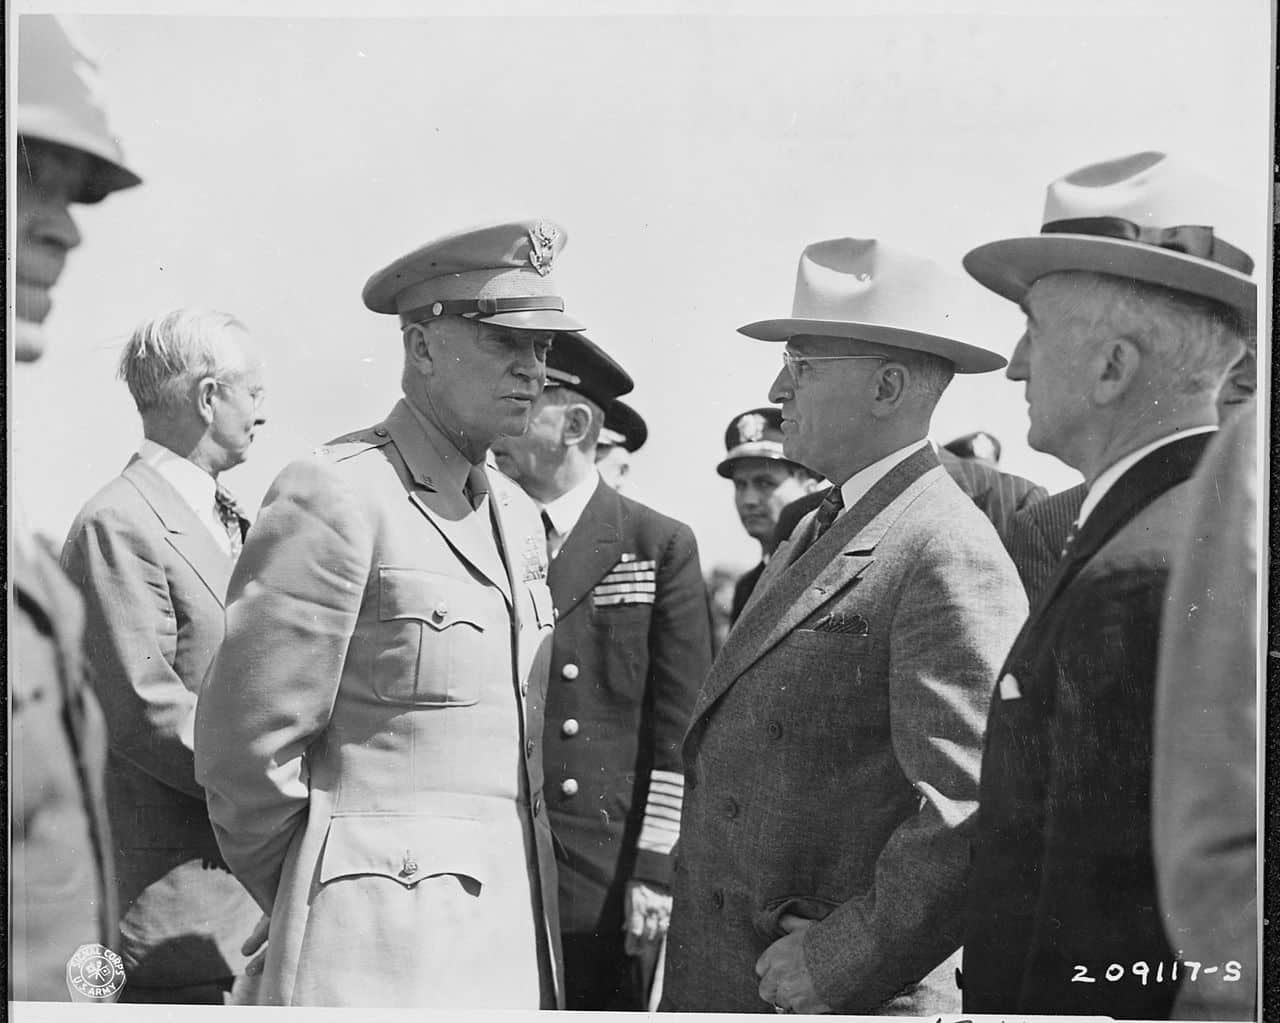 The Potsdam Conference - July 16th 1945 - Eisenhower chats with President Harry S. Truman at an airfield in Brussels, Belgium where the President is waiting to fly to Berlin